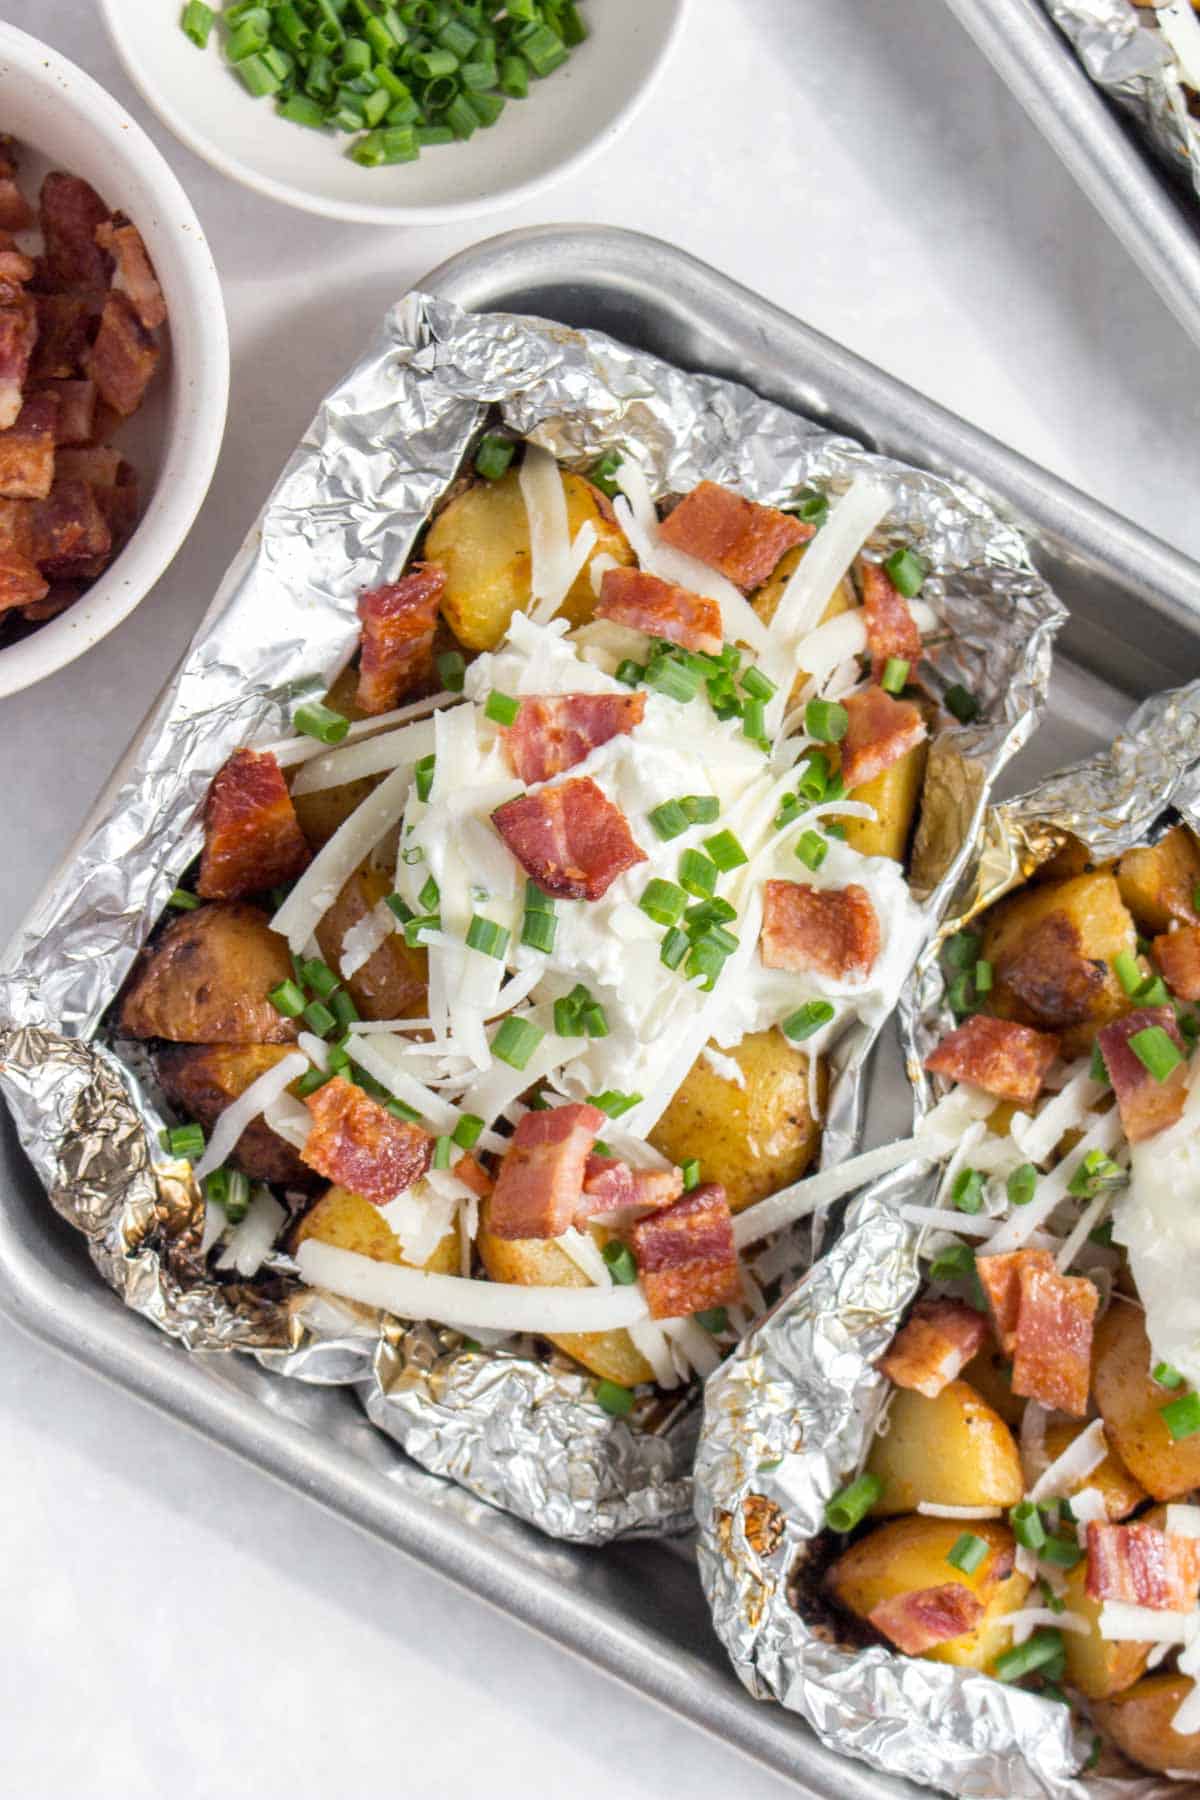 Overhead view of two foil packet potatoes with sour cream, cheese, bacon, and chives.